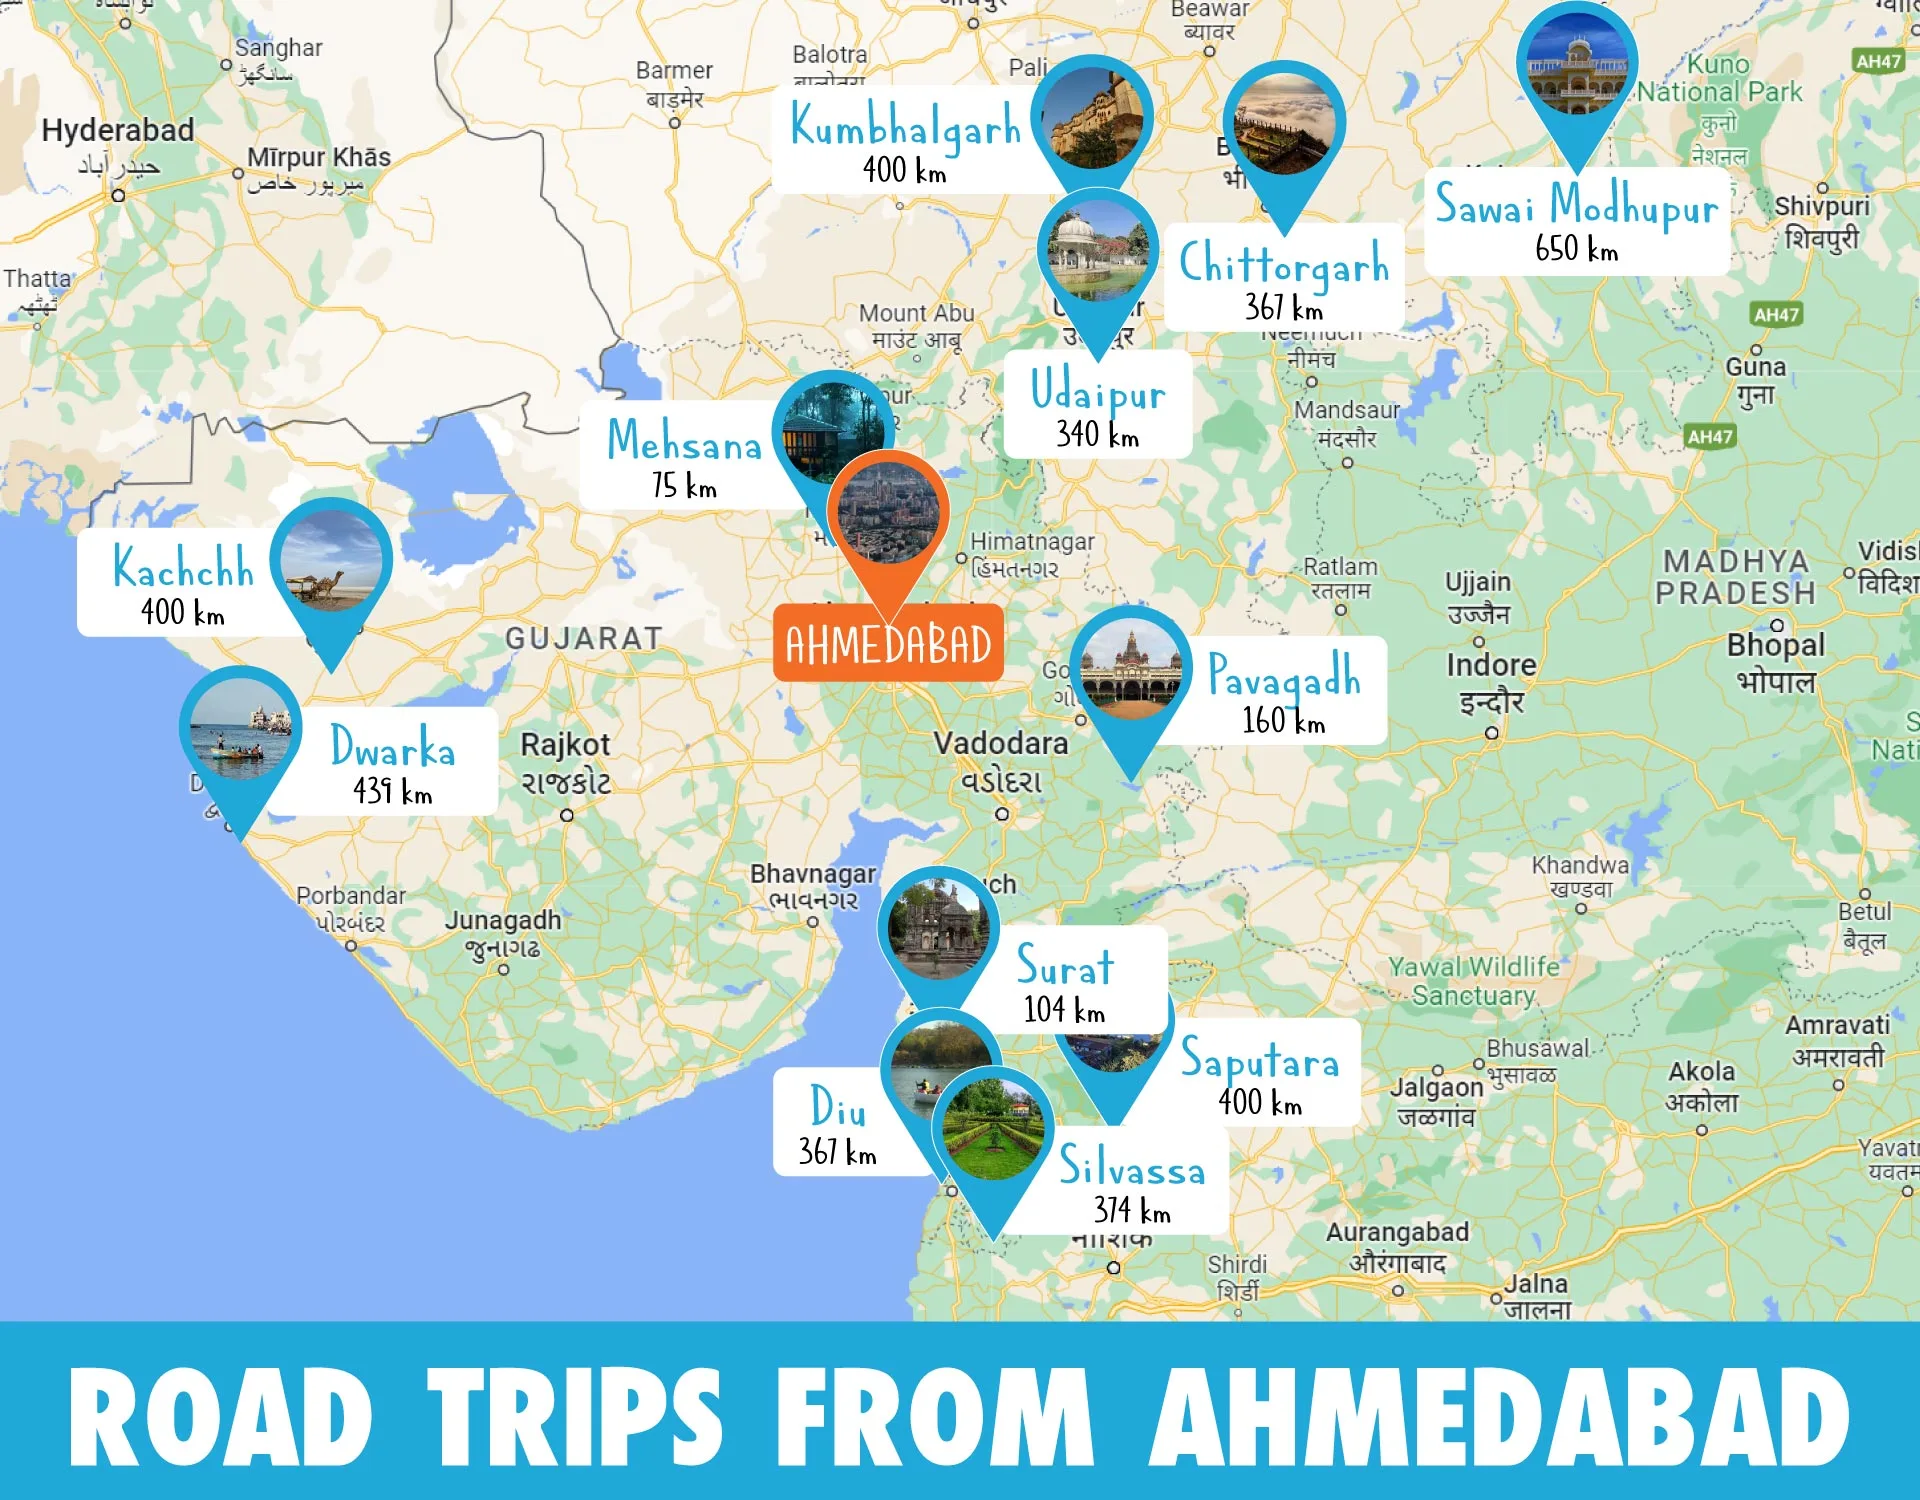 Places to visit near AhmedabadHeritage, culture, food & mysteries